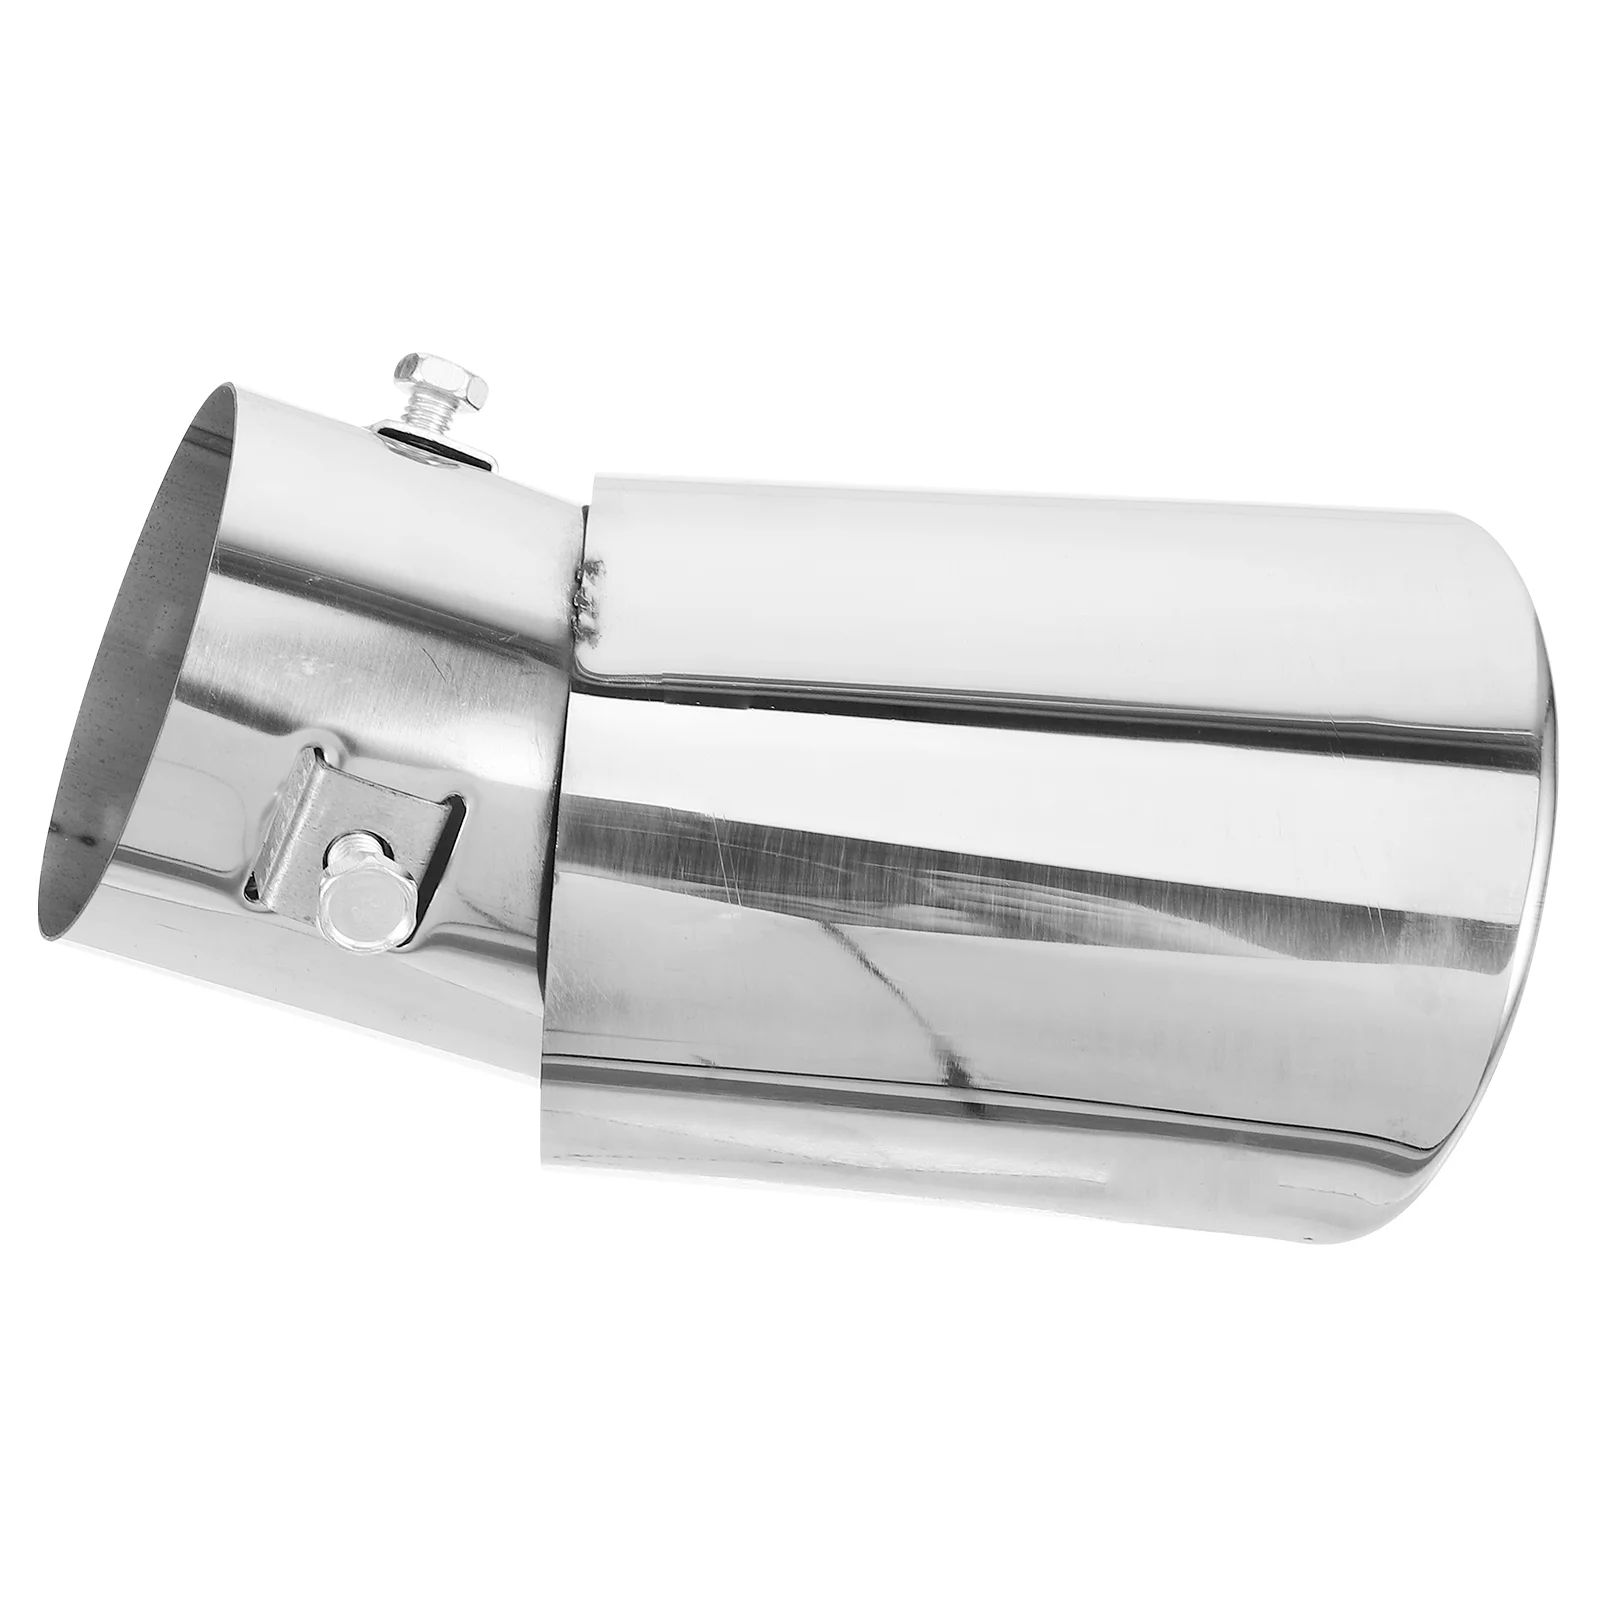 

Car Exhaust Muffler Tips Stainless Steel Silencer Automotive Systems for Tail Truck